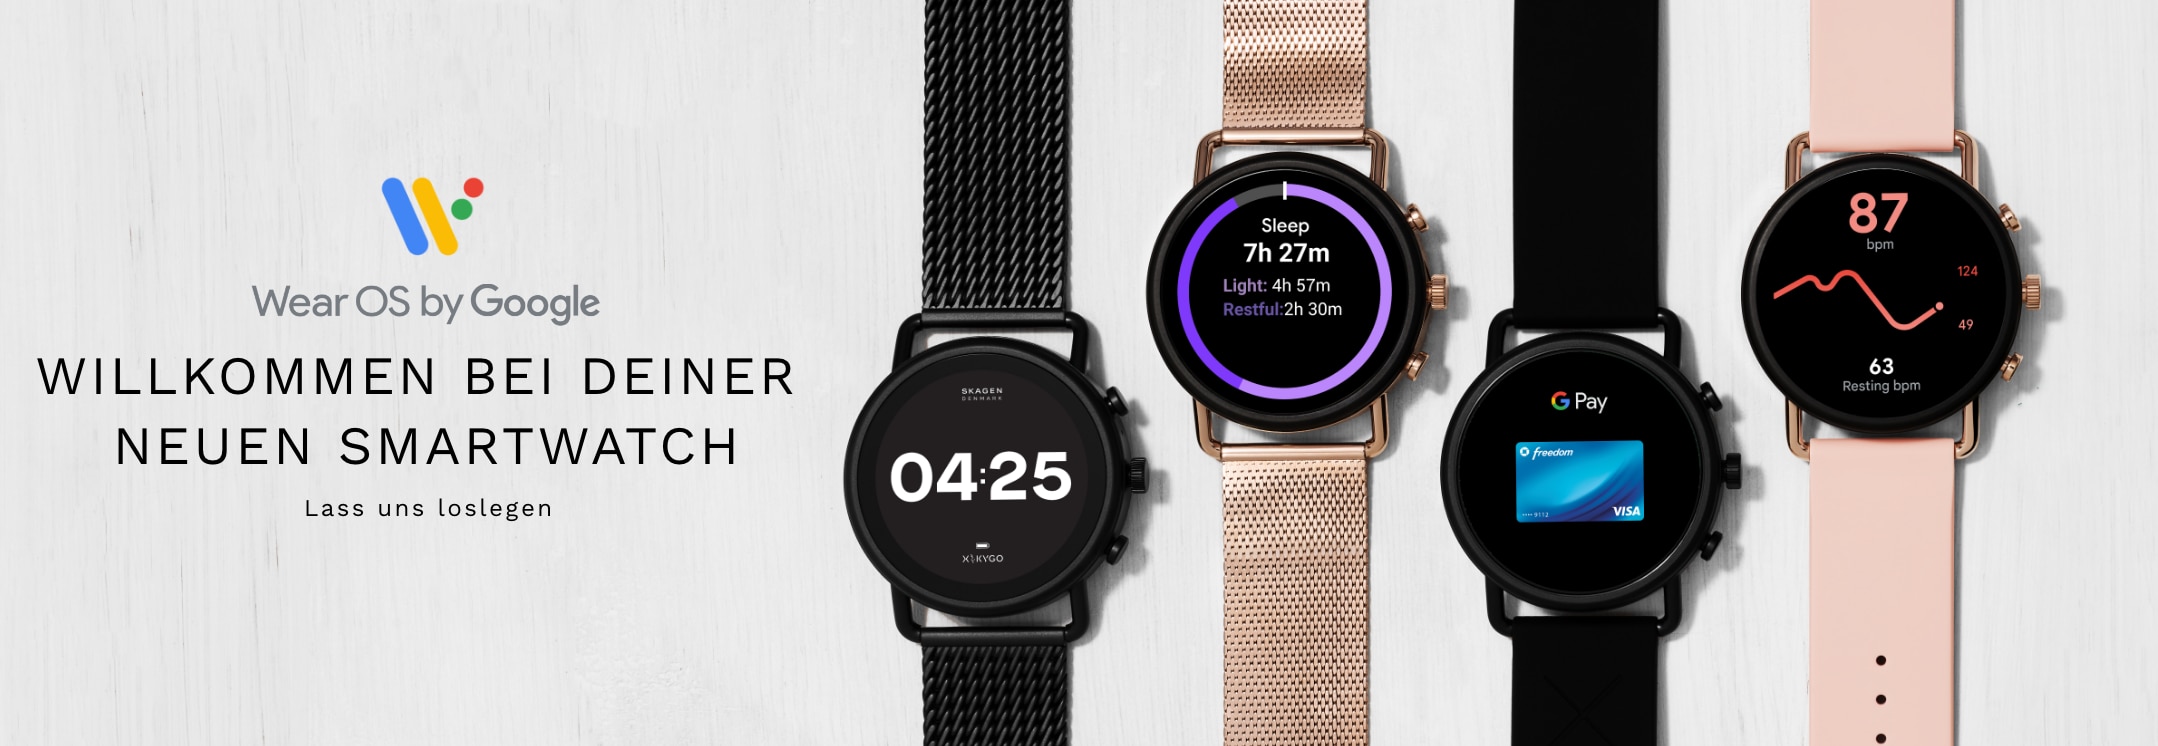 Learn how to set up your new smartwatch. Welcome to your new smartwatch. Let's get started.